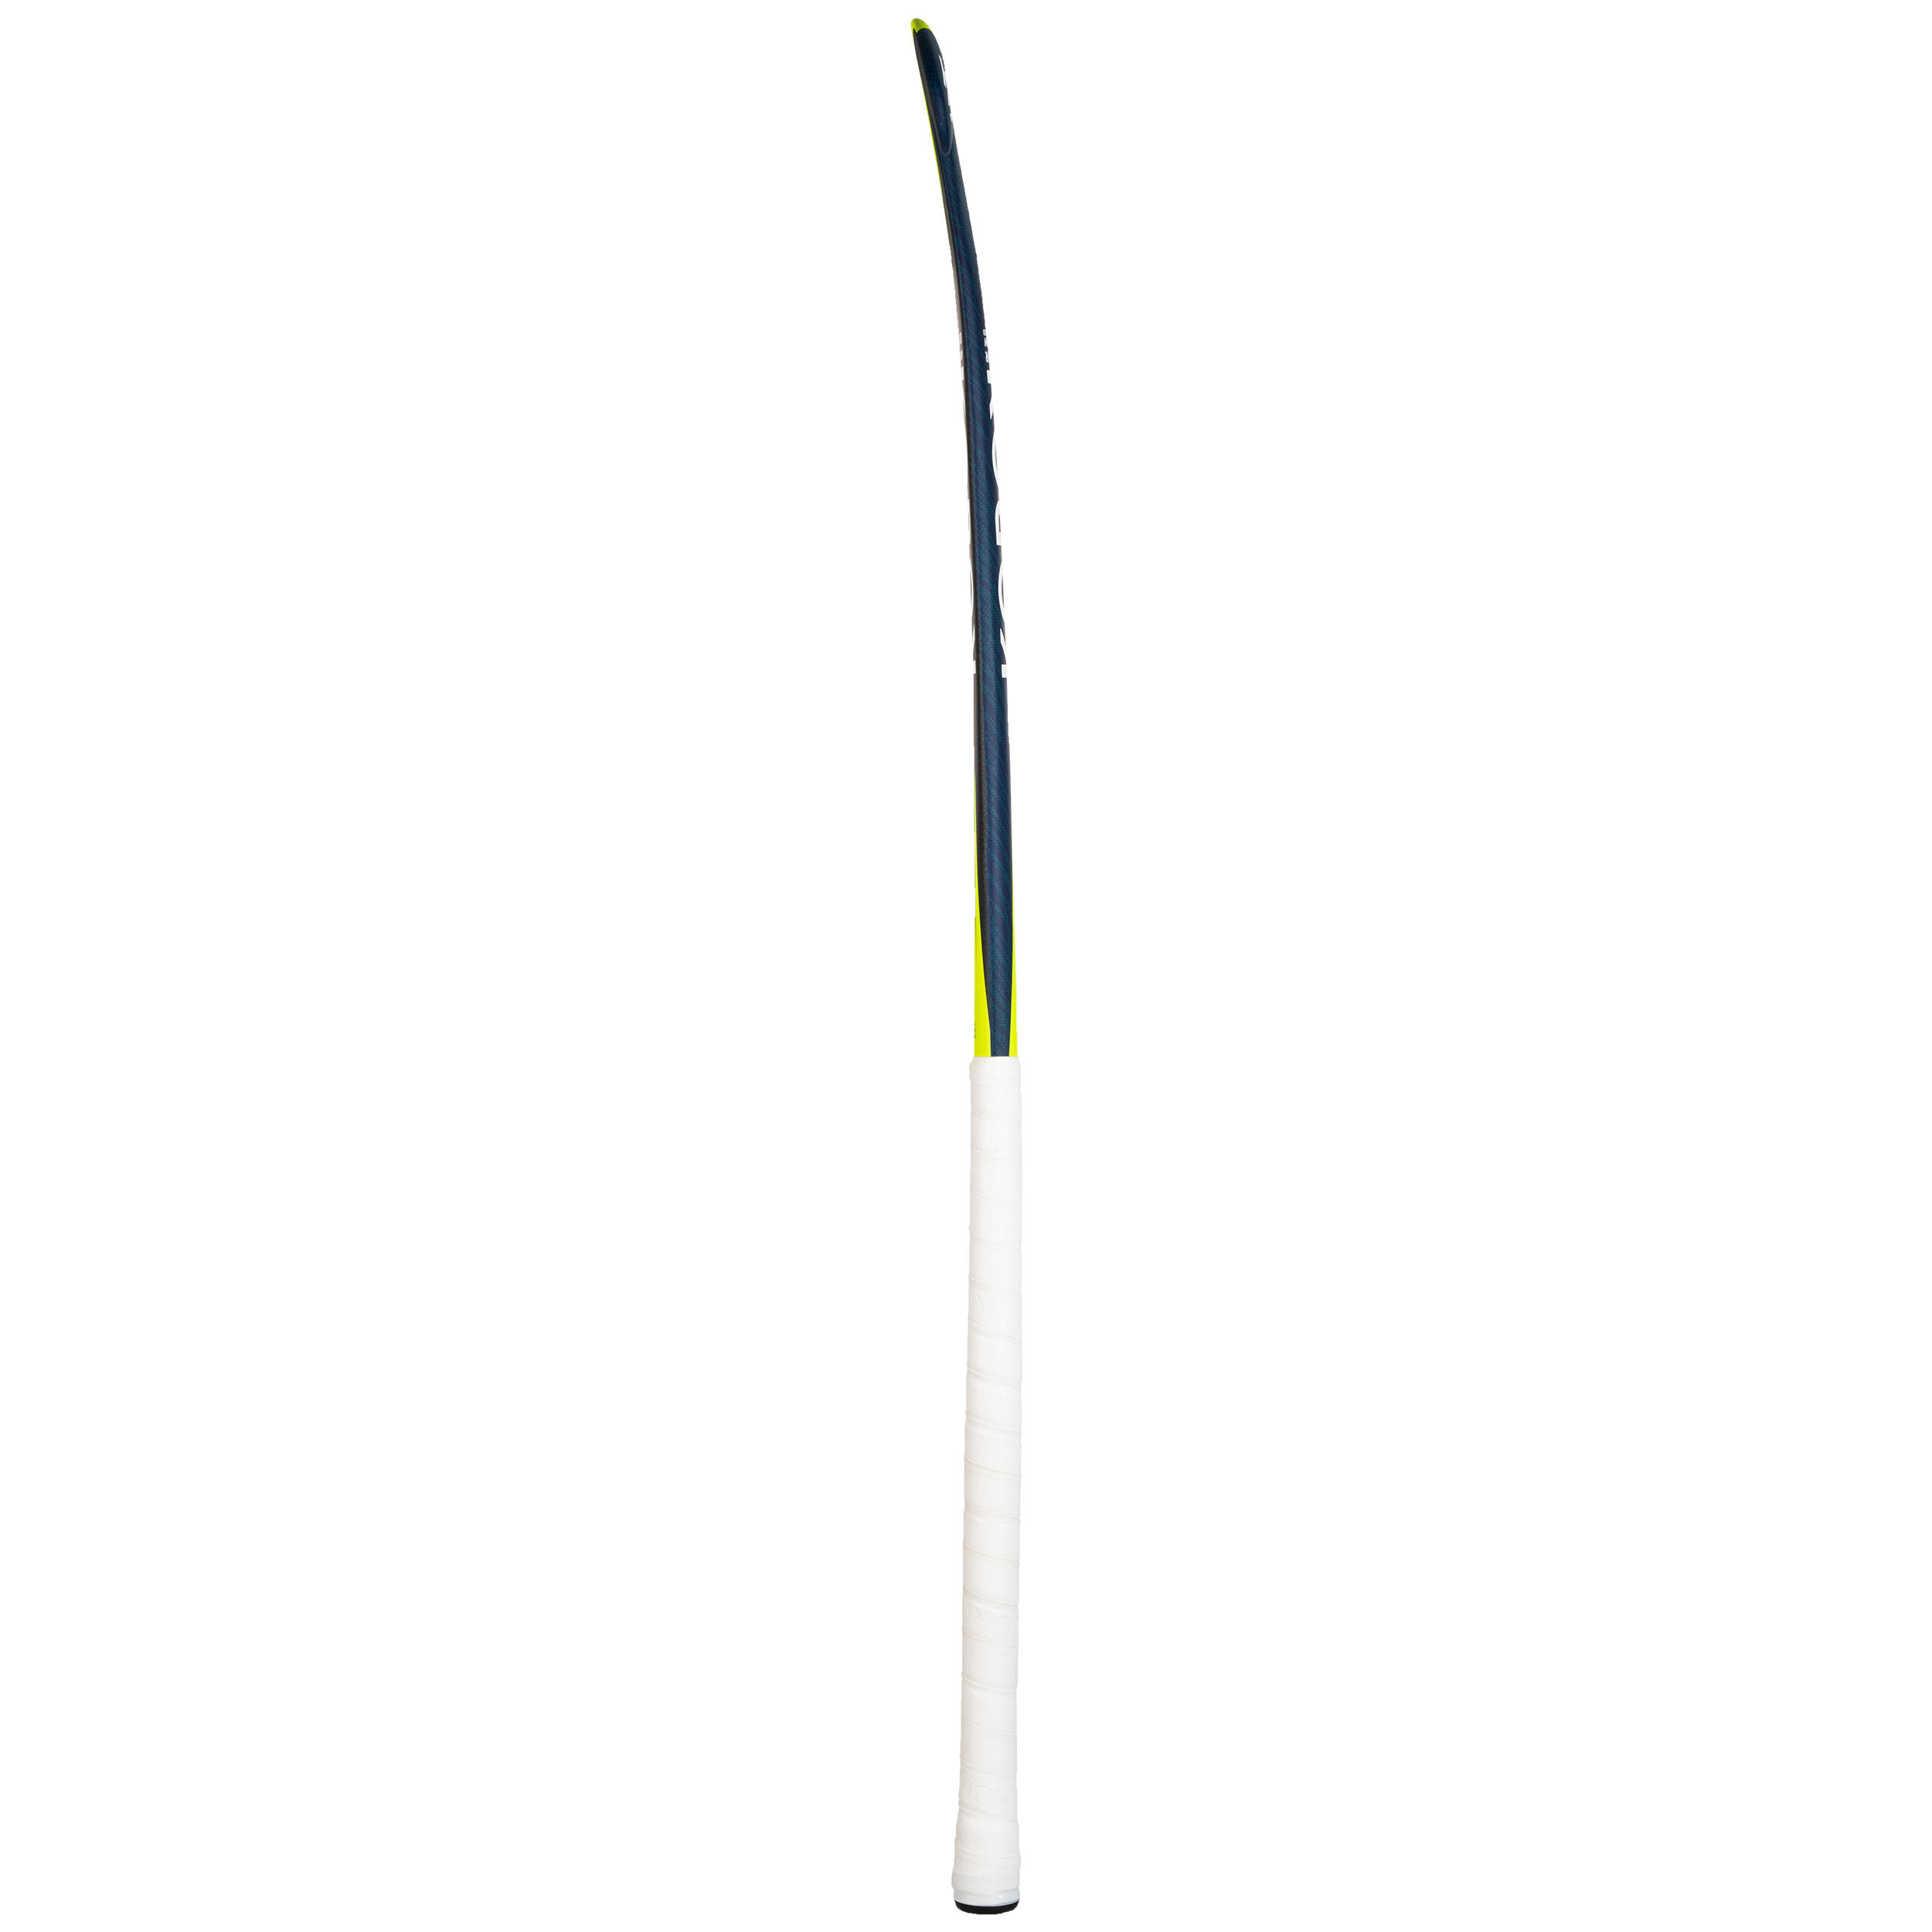 Adult Intermediate 20% Carbon Low Bow Indoor Hockey Stick FH520 - Blue/Yellow 8/10